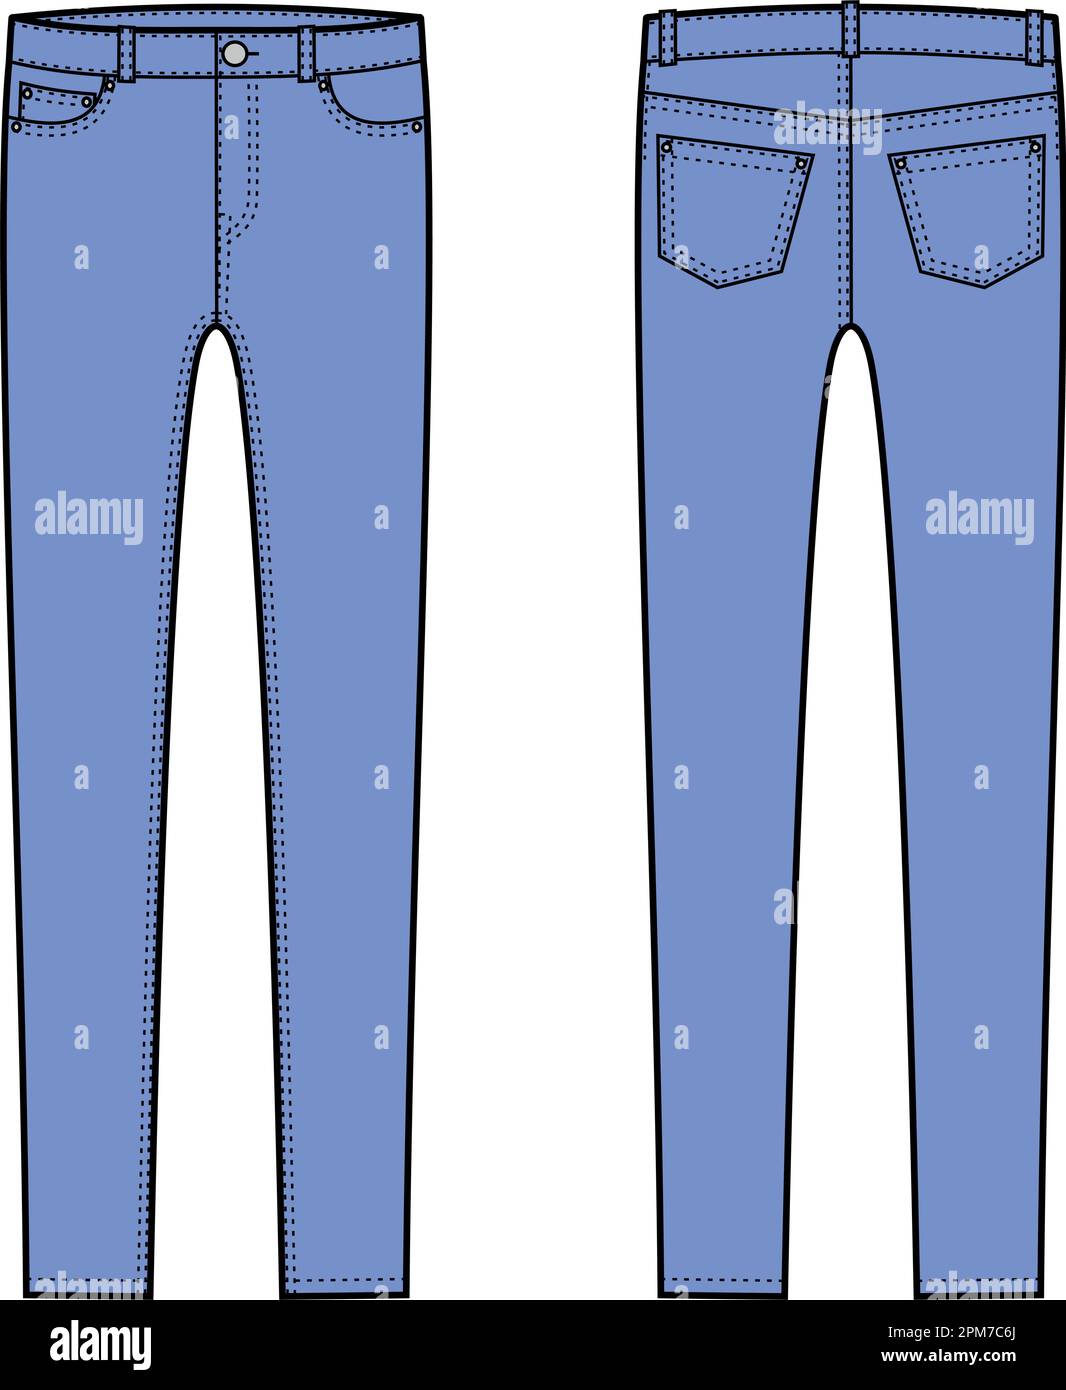 Skinny jeans Stock Vector Images - Alamy